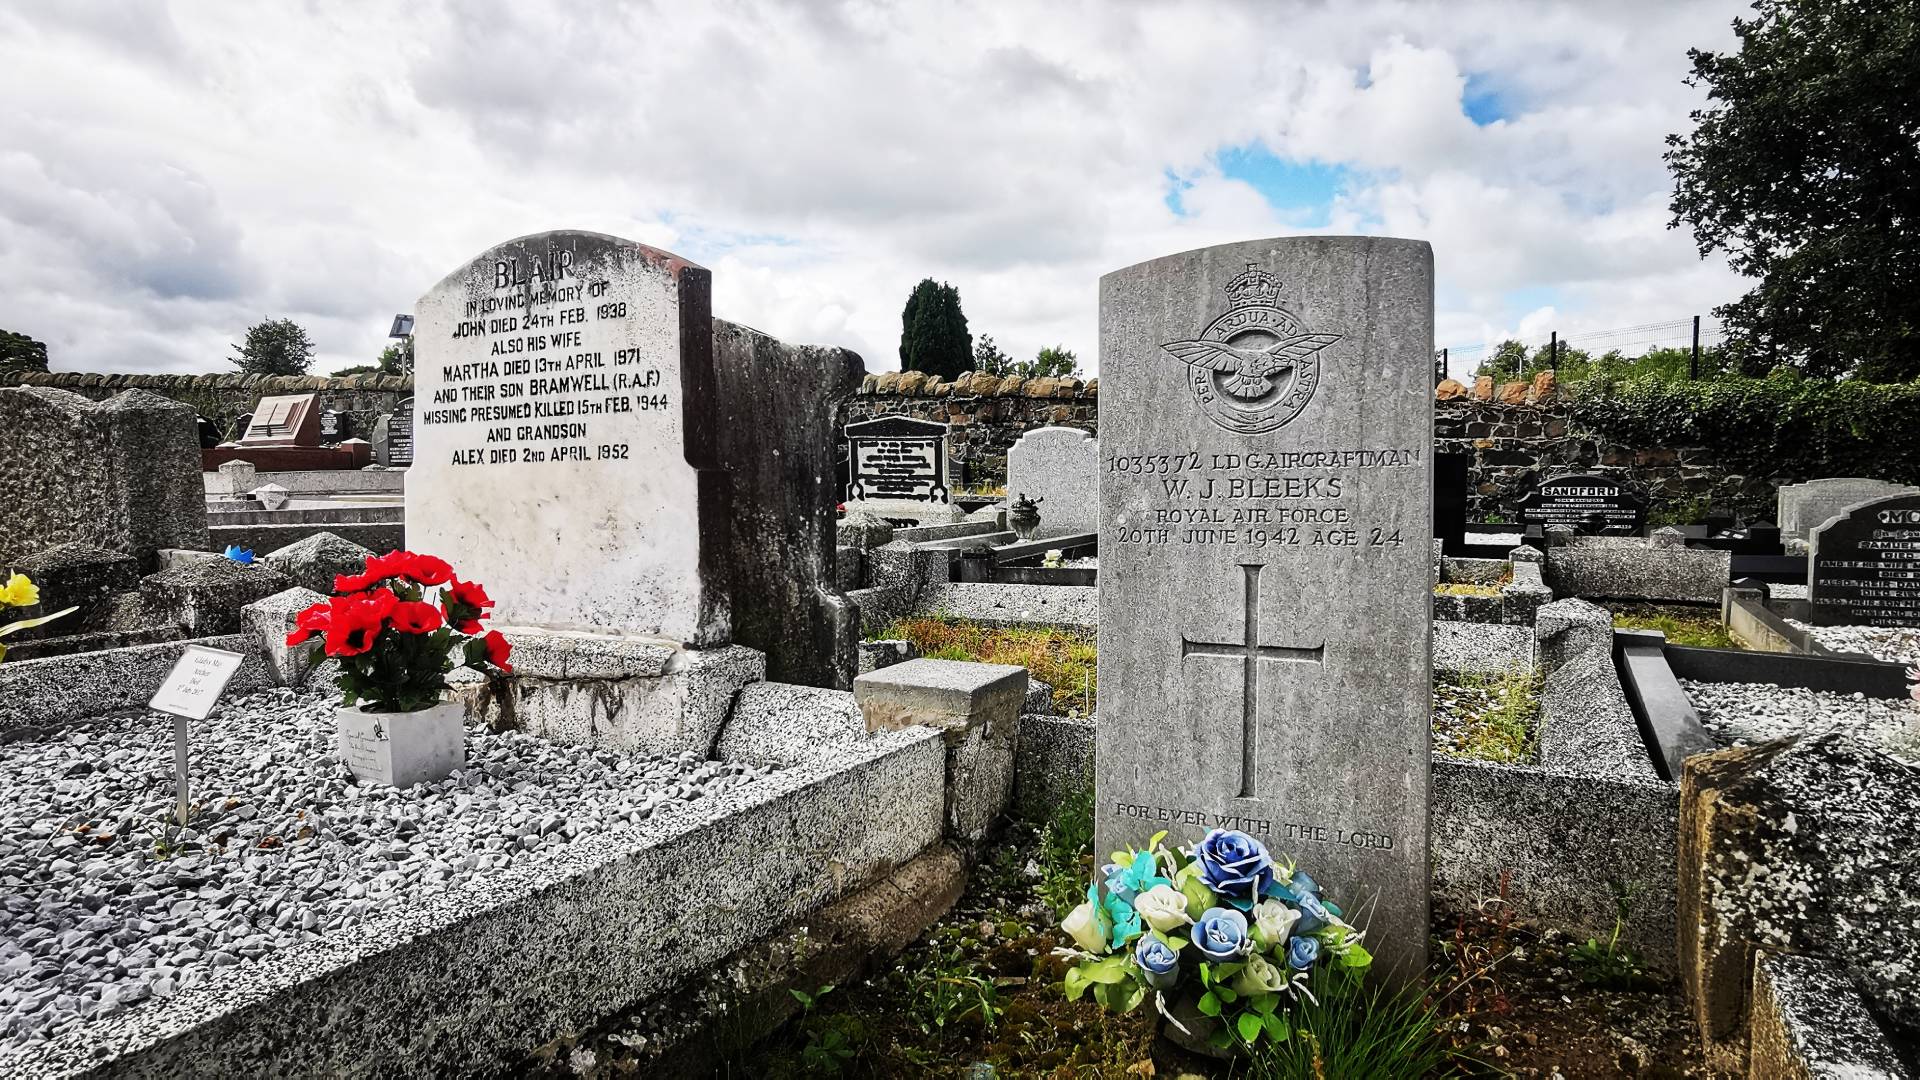 A Commonwealth War Graves headstone marks the grave of Leading Aircraftman William James Bleeks in Seagoe Cemetery, Portadown, Co. Armagh.